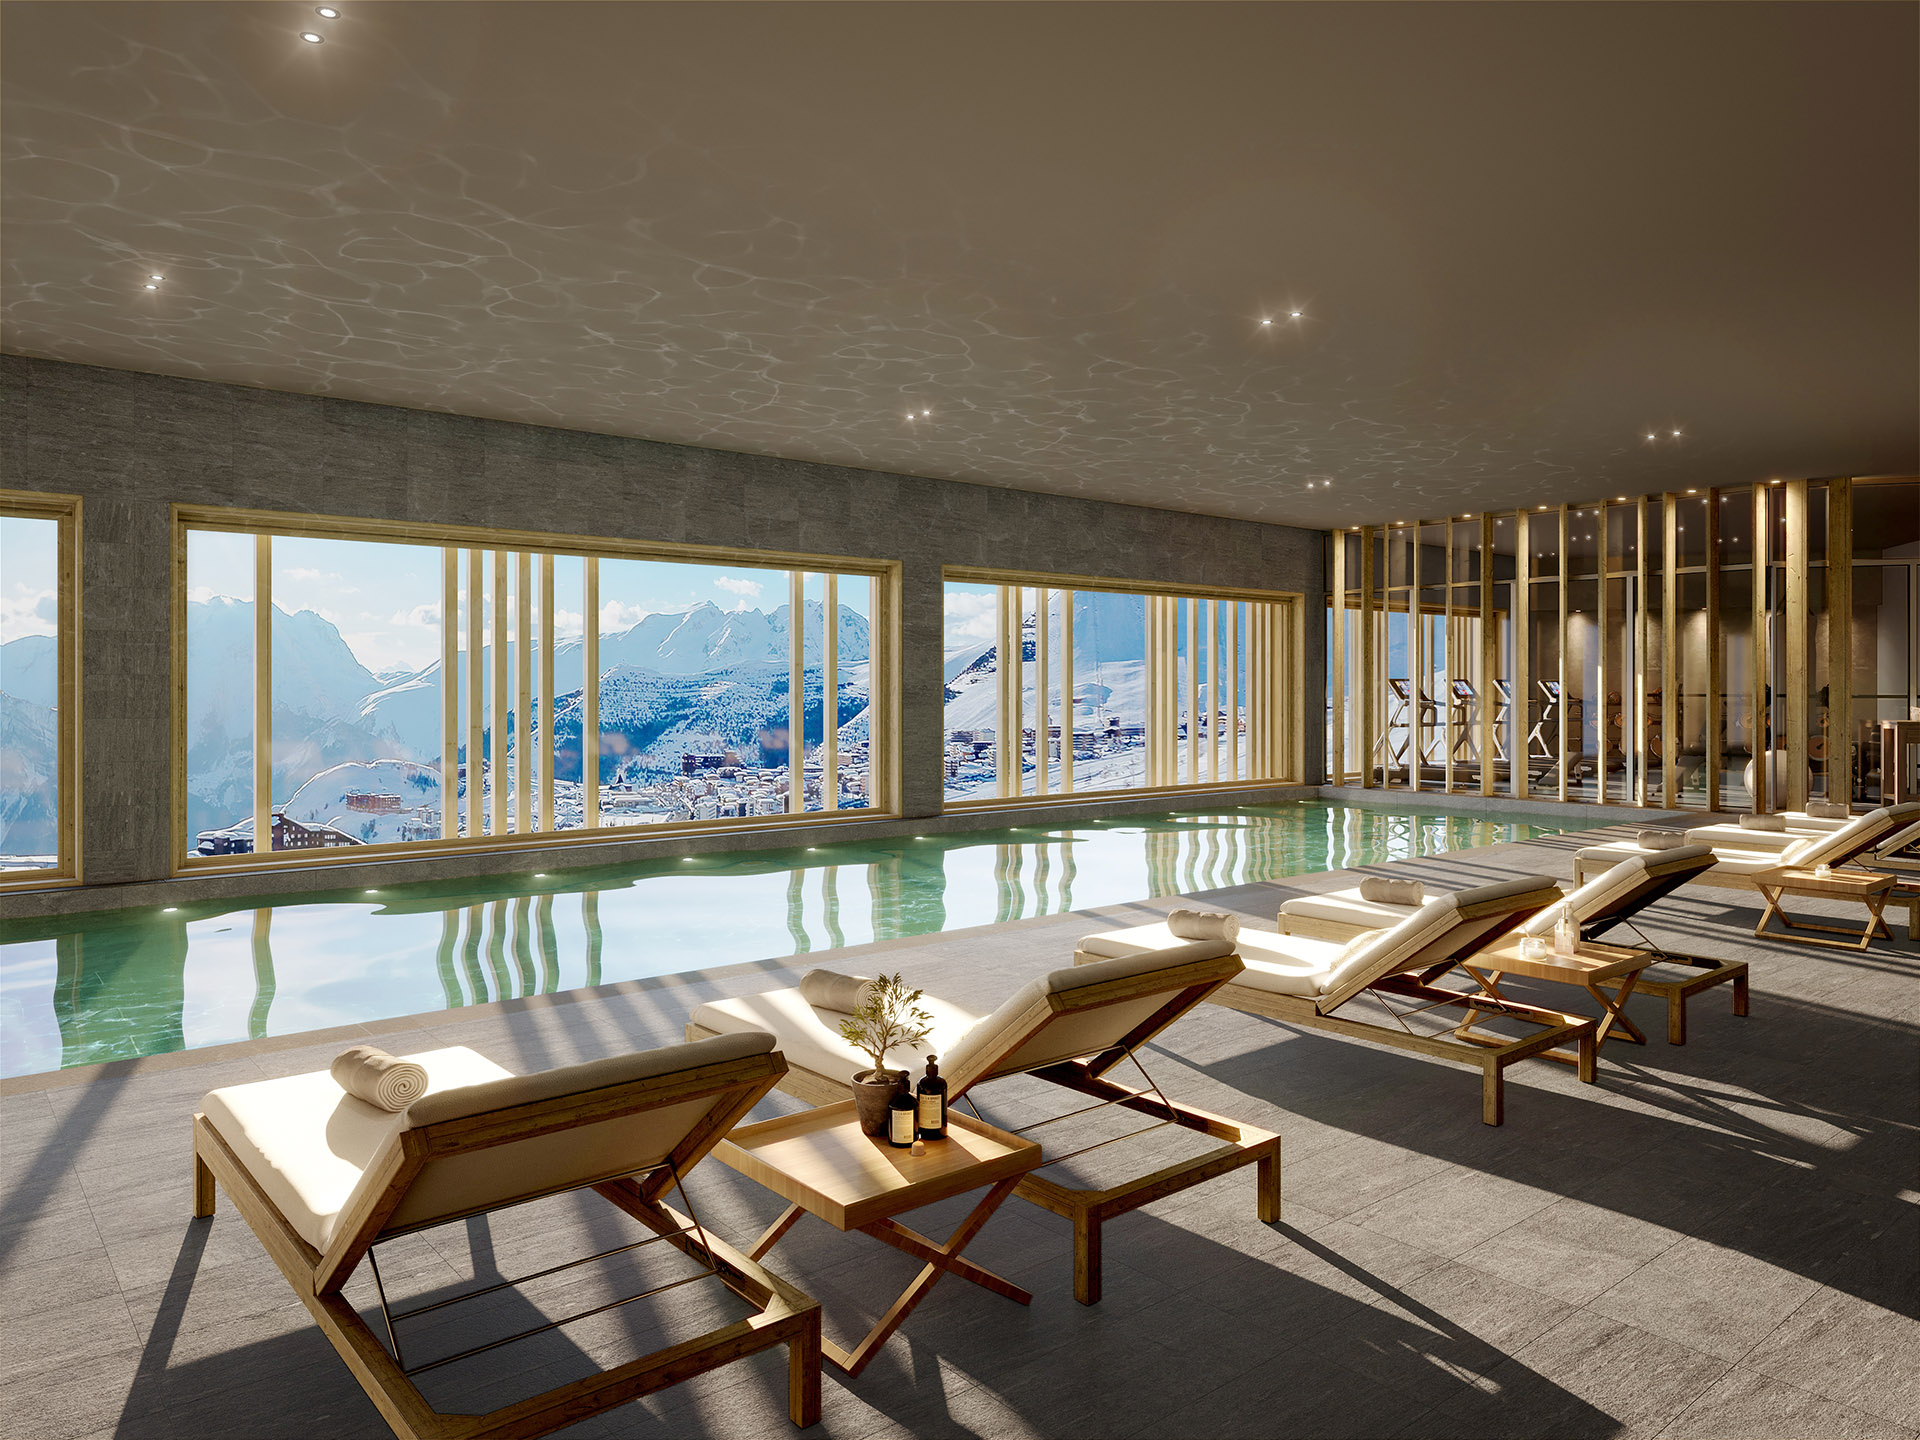 3D image of an indoor pool in a chalet with a mountain view